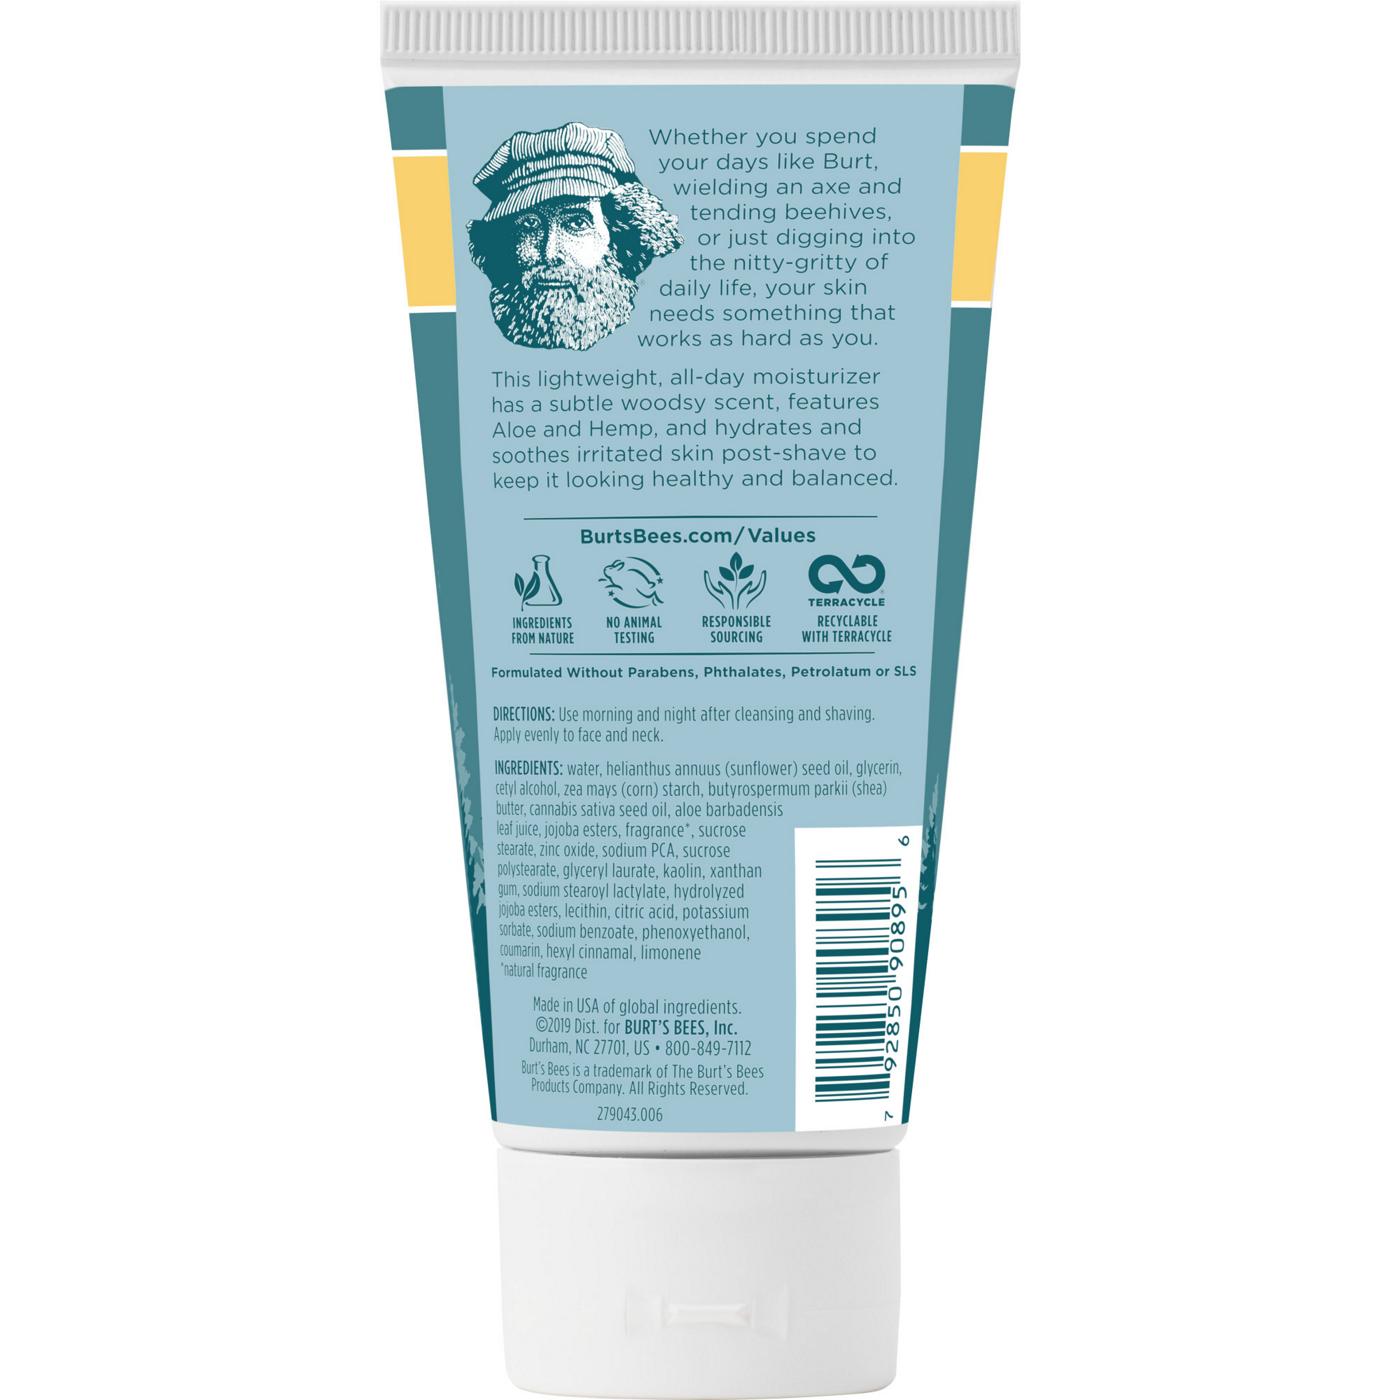 Burt's Bees Men's Soothing Moisturizer + After Shave with Aloe & Hemp; image 4 of 5